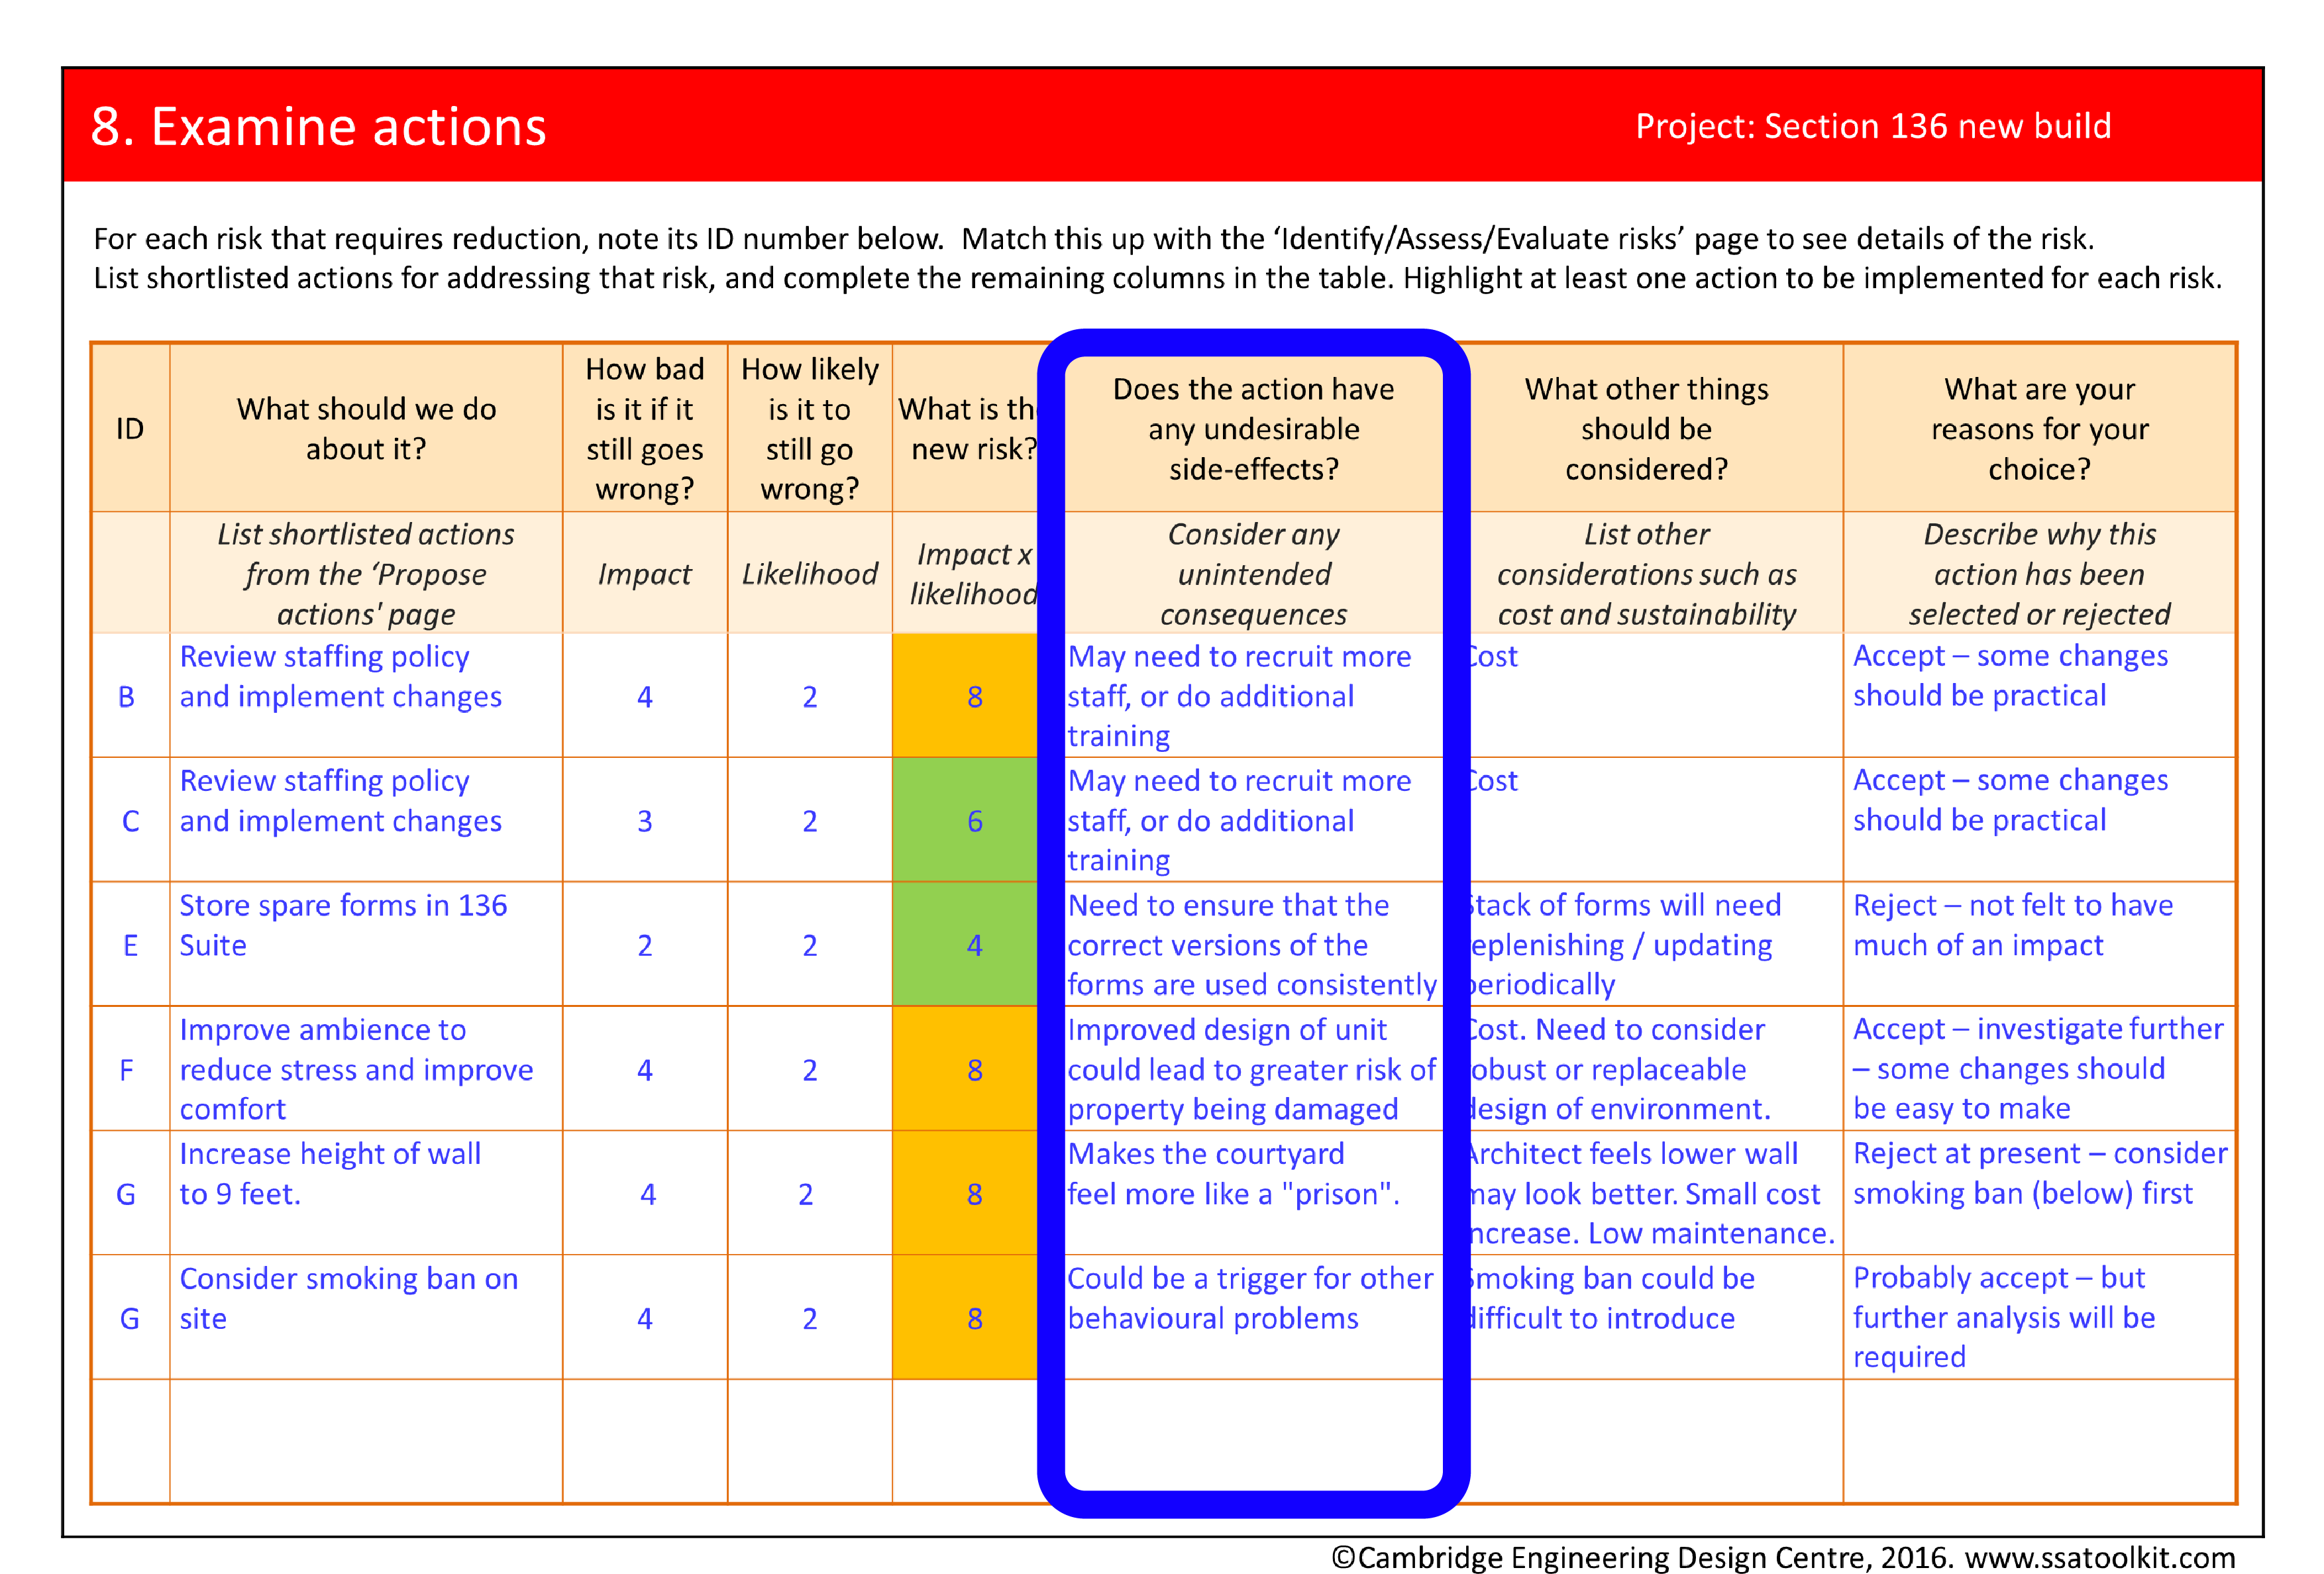 Screenshot of the Examine actions page from the Section 136 case study. The column describing side-effects of the proposed actions is circled. For example, changes to the staffing policy may result in needing to recruit more staff or do additional training. The full form in pdf is available from the Resources page.